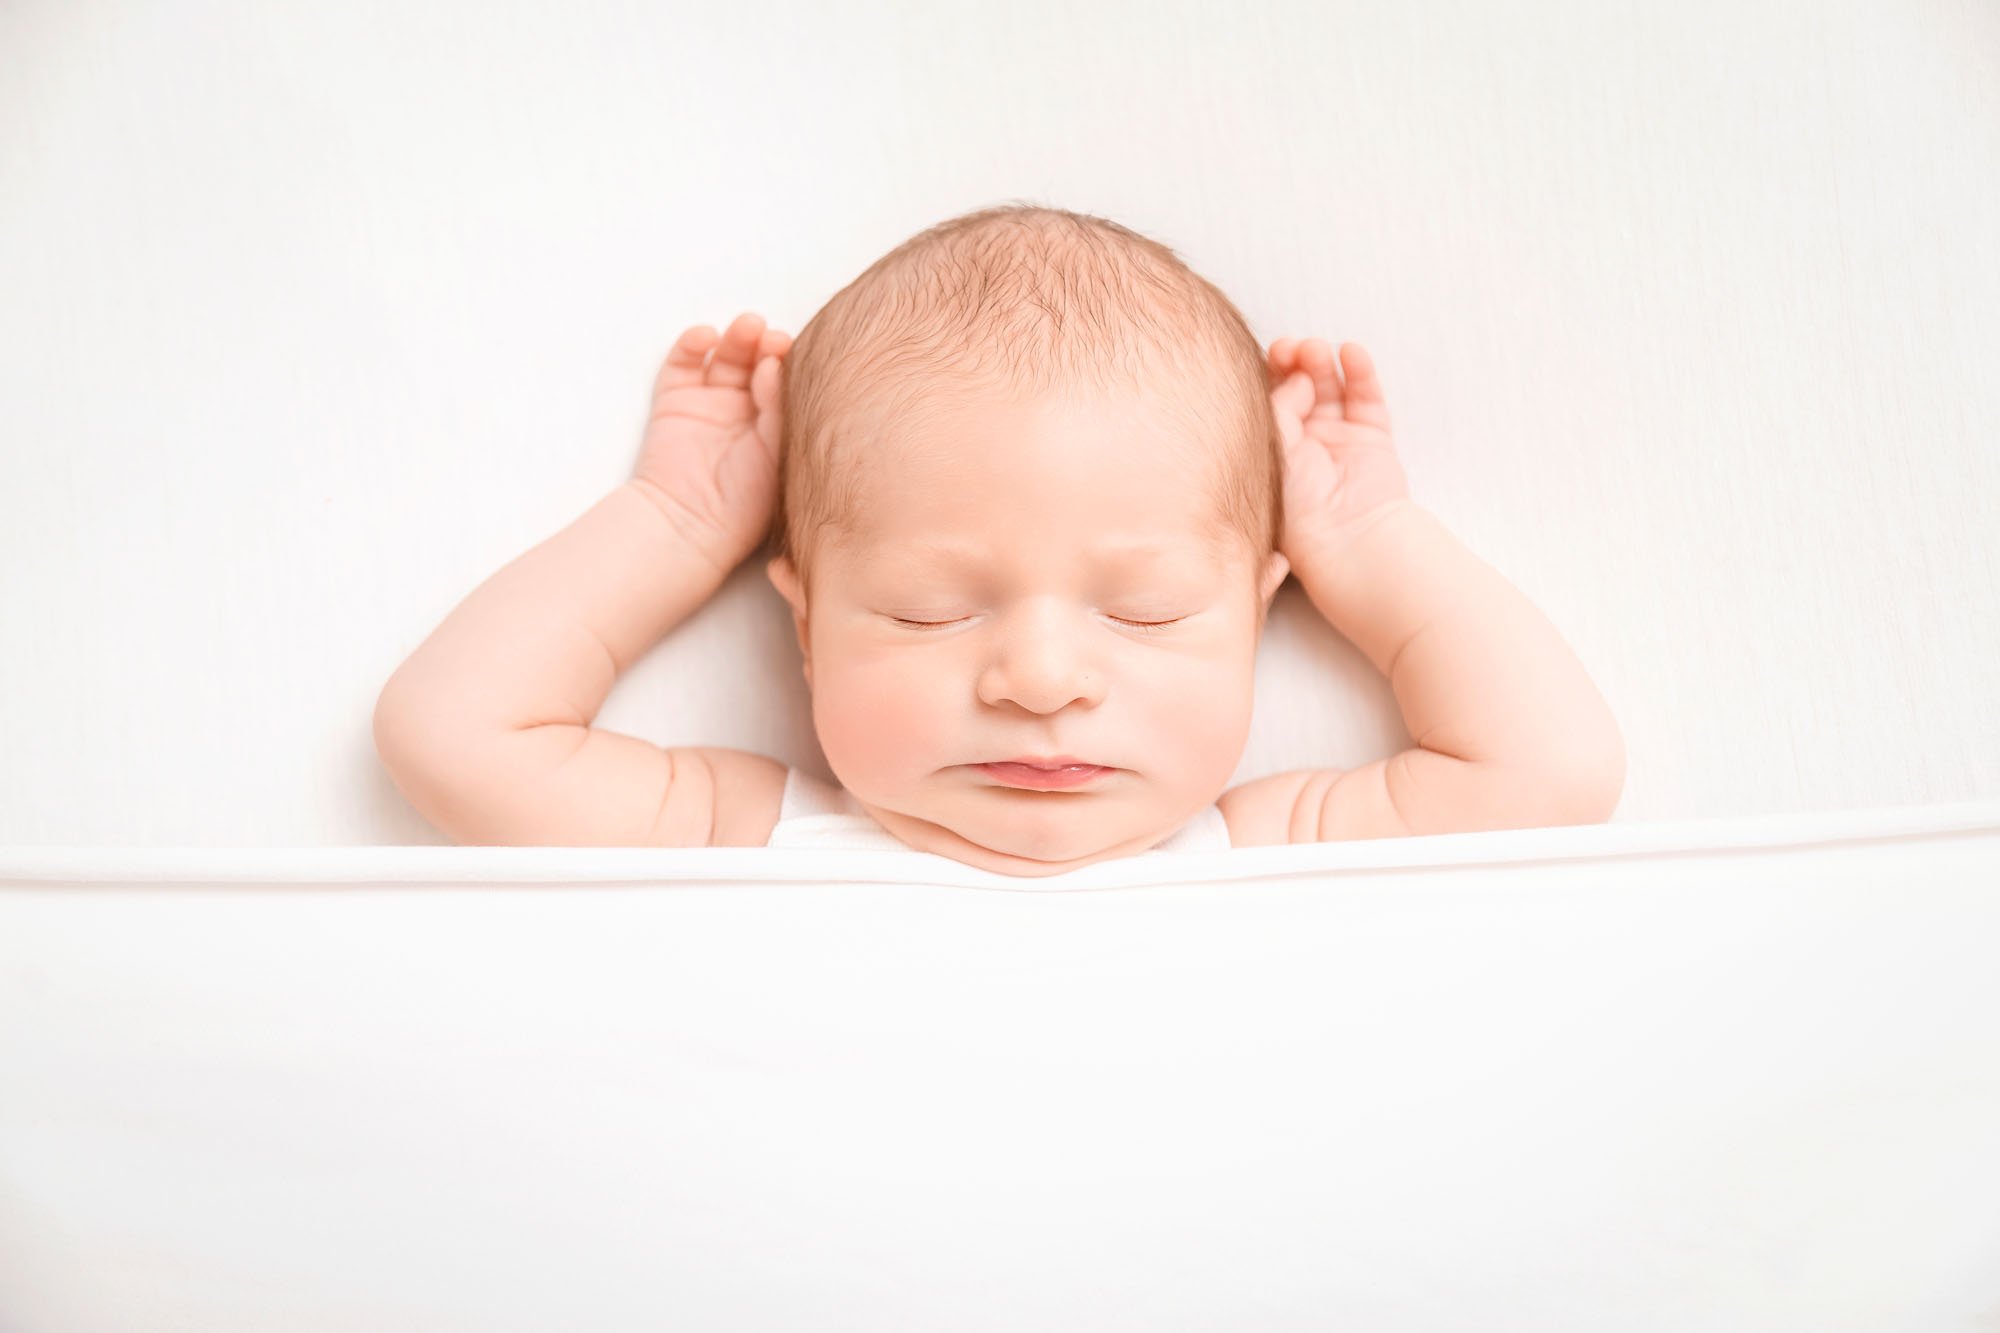 Newborn-photography-in-leeds-tucked-in-bed-white.jpg